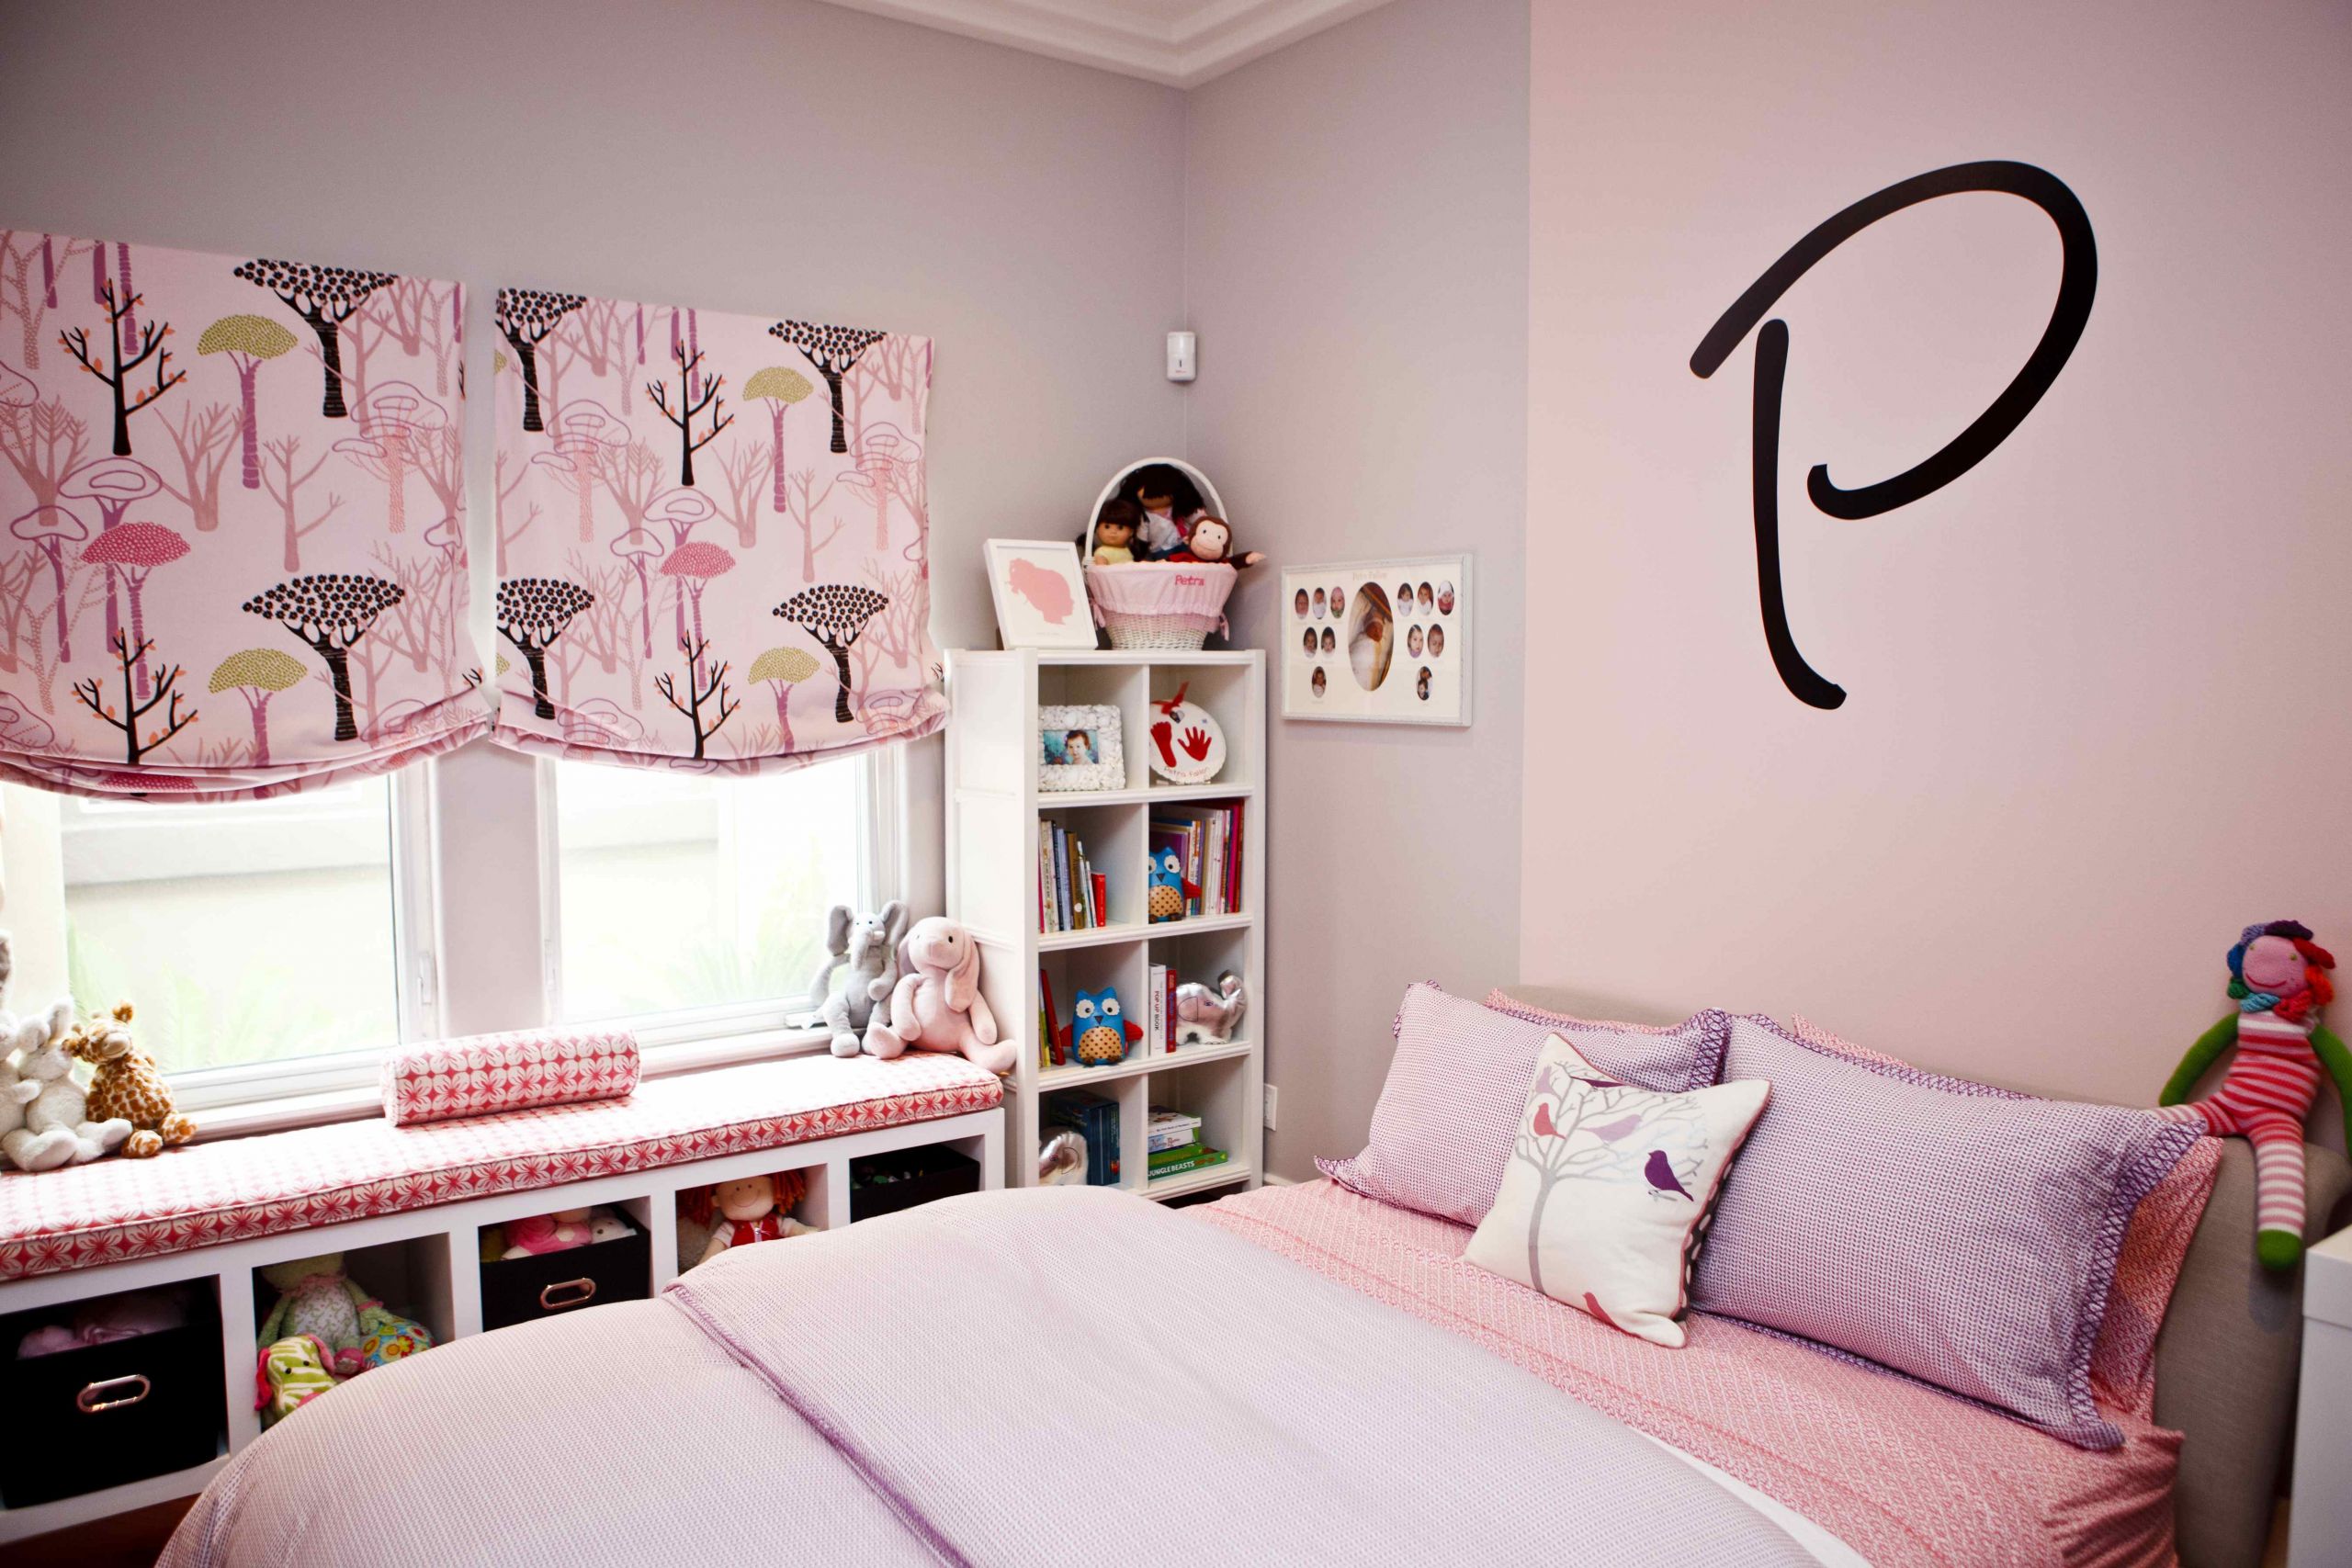 Girls Bedroom Painting Ideas
 Colorful and Pattern Kids Room Paint Ideas Amaza Design